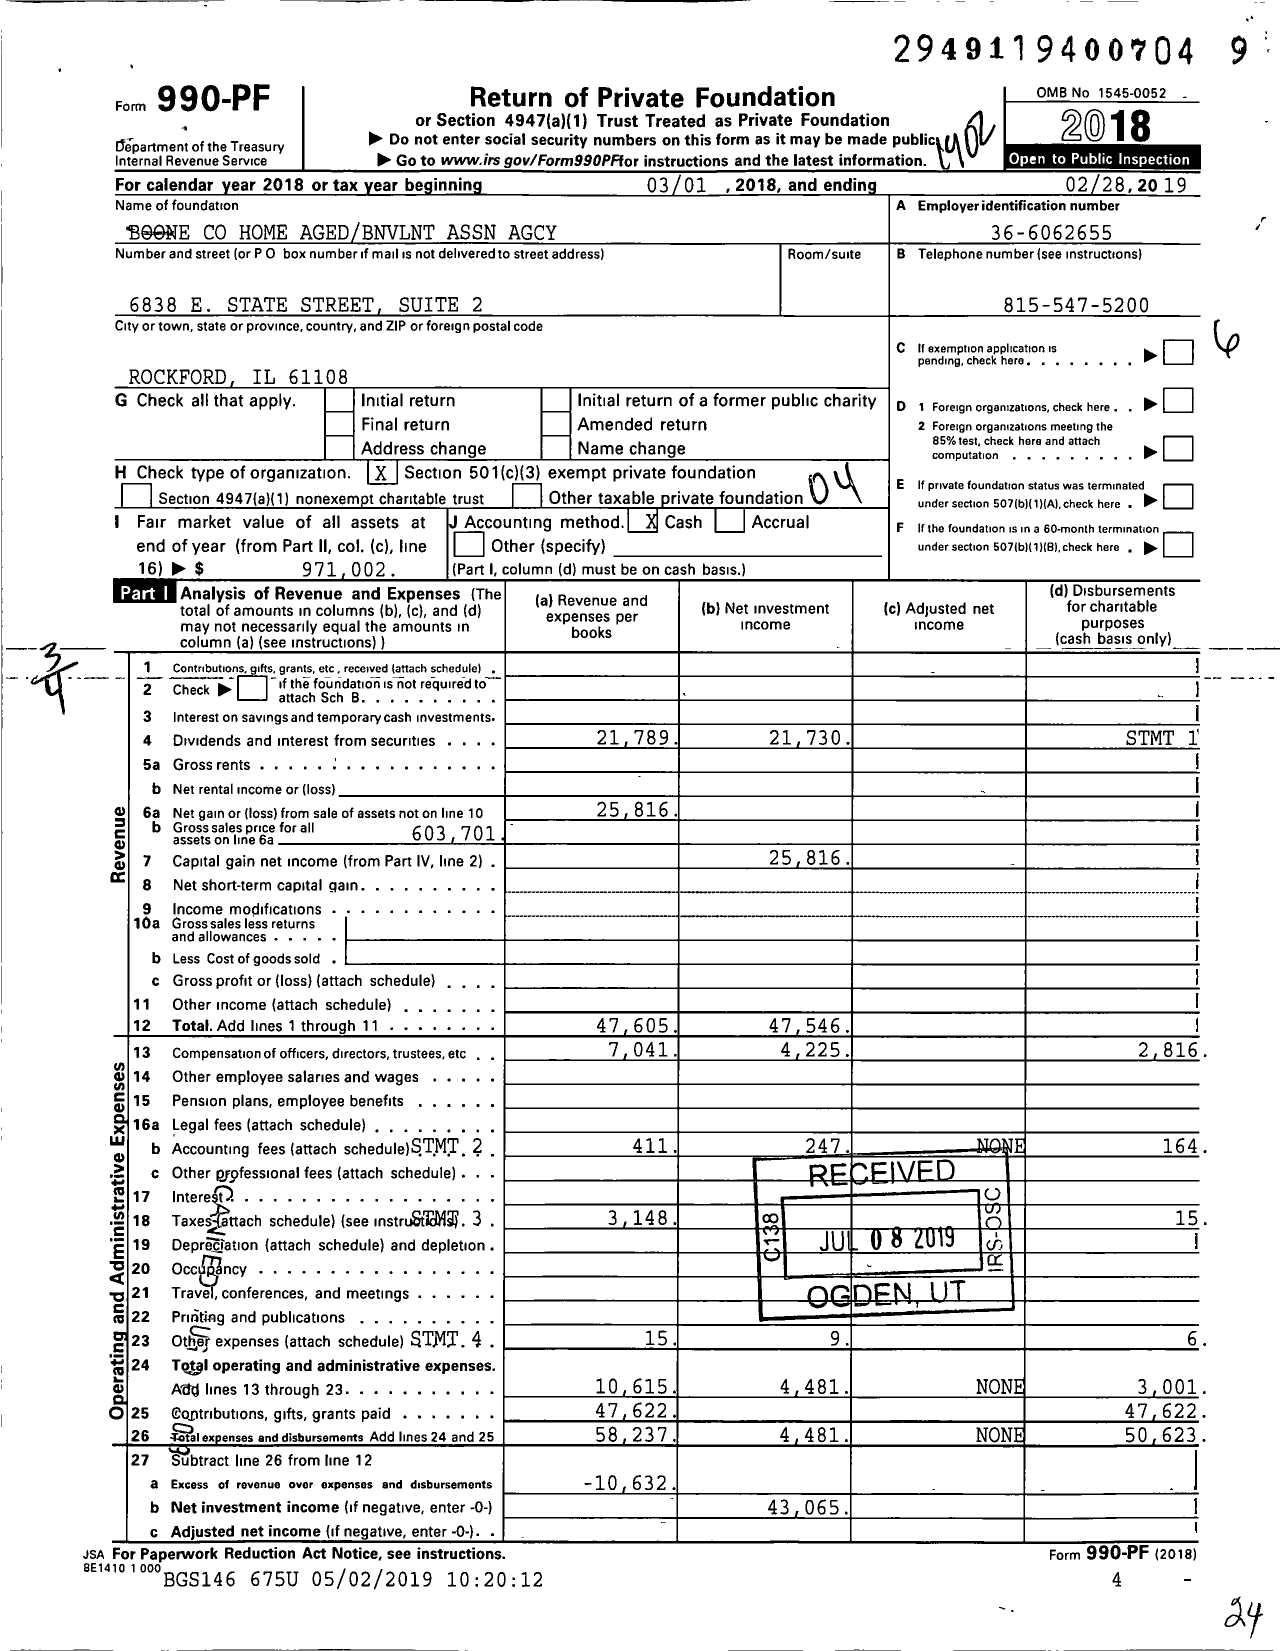 Image of first page of 2018 Form 990PF for Boone Home Agedbnvlnt Association Agcy